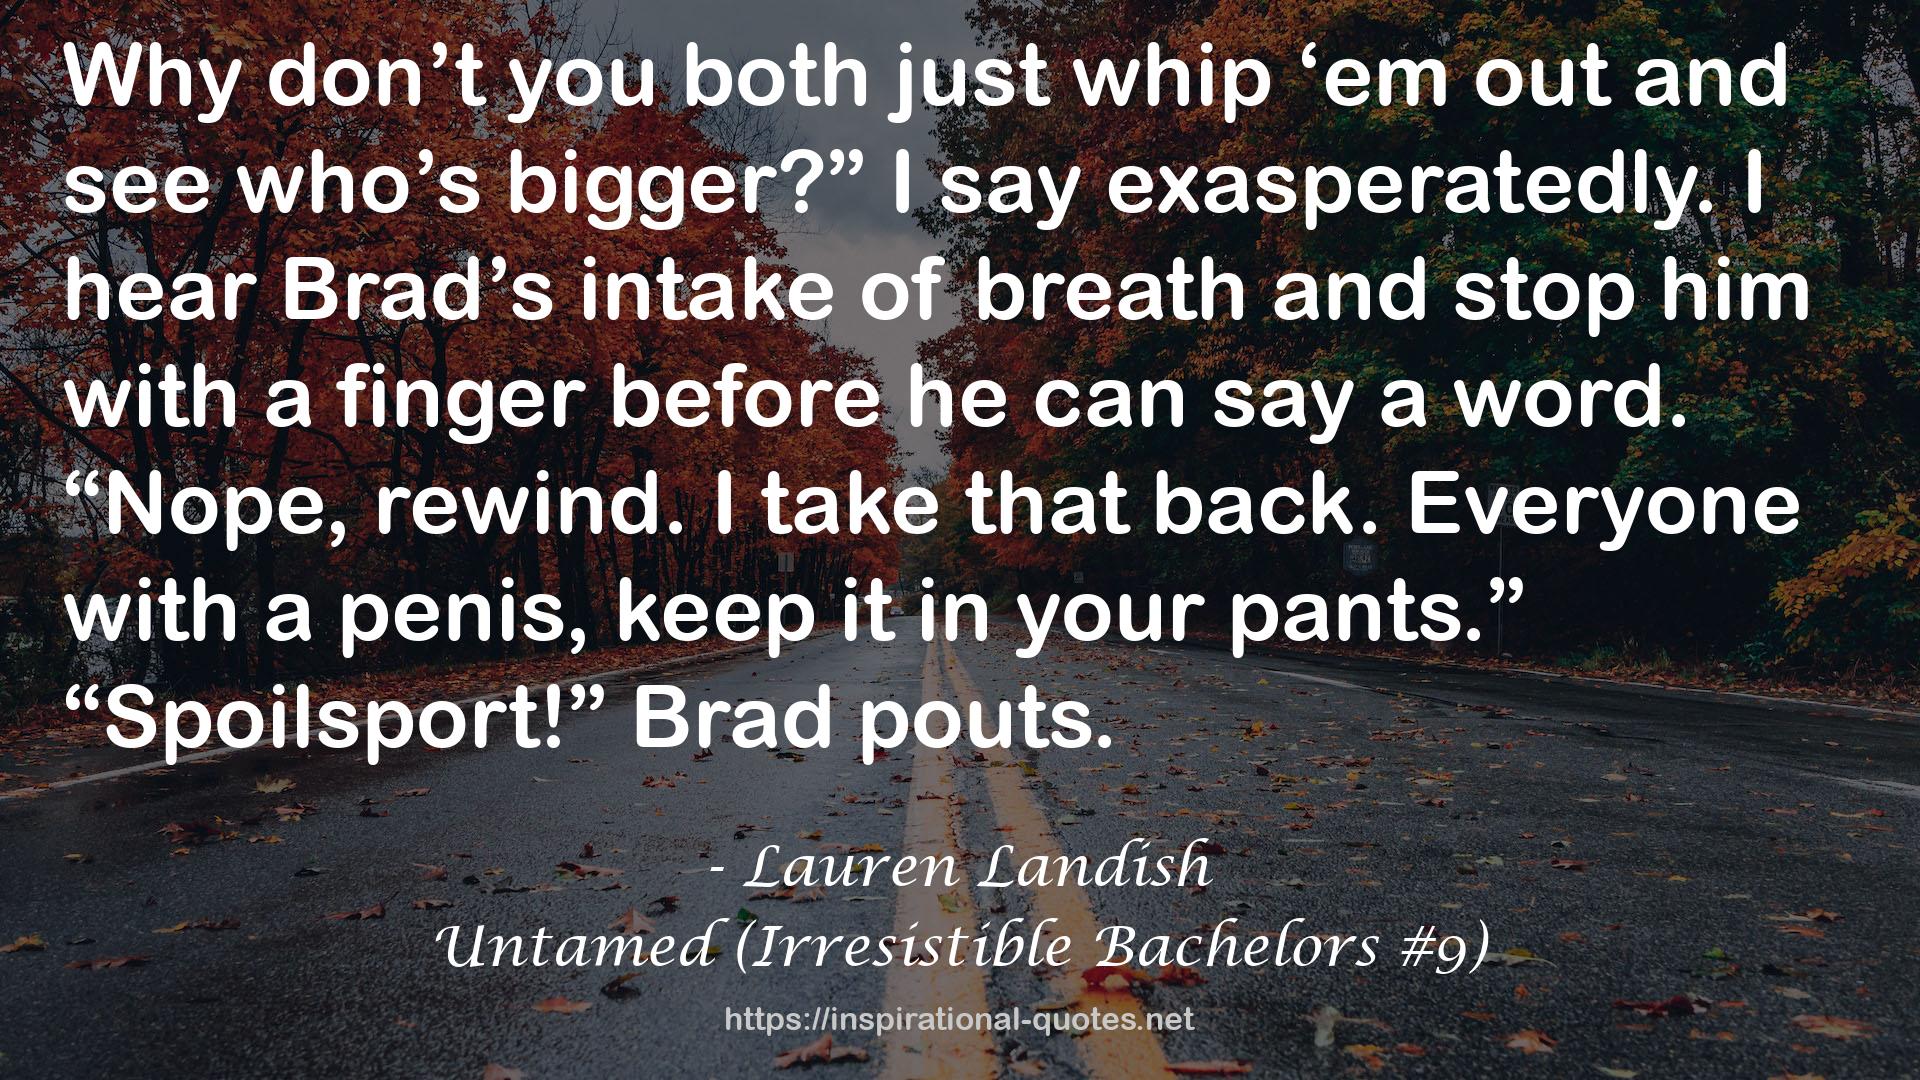 Untamed (Irresistible Bachelors #9) QUOTES